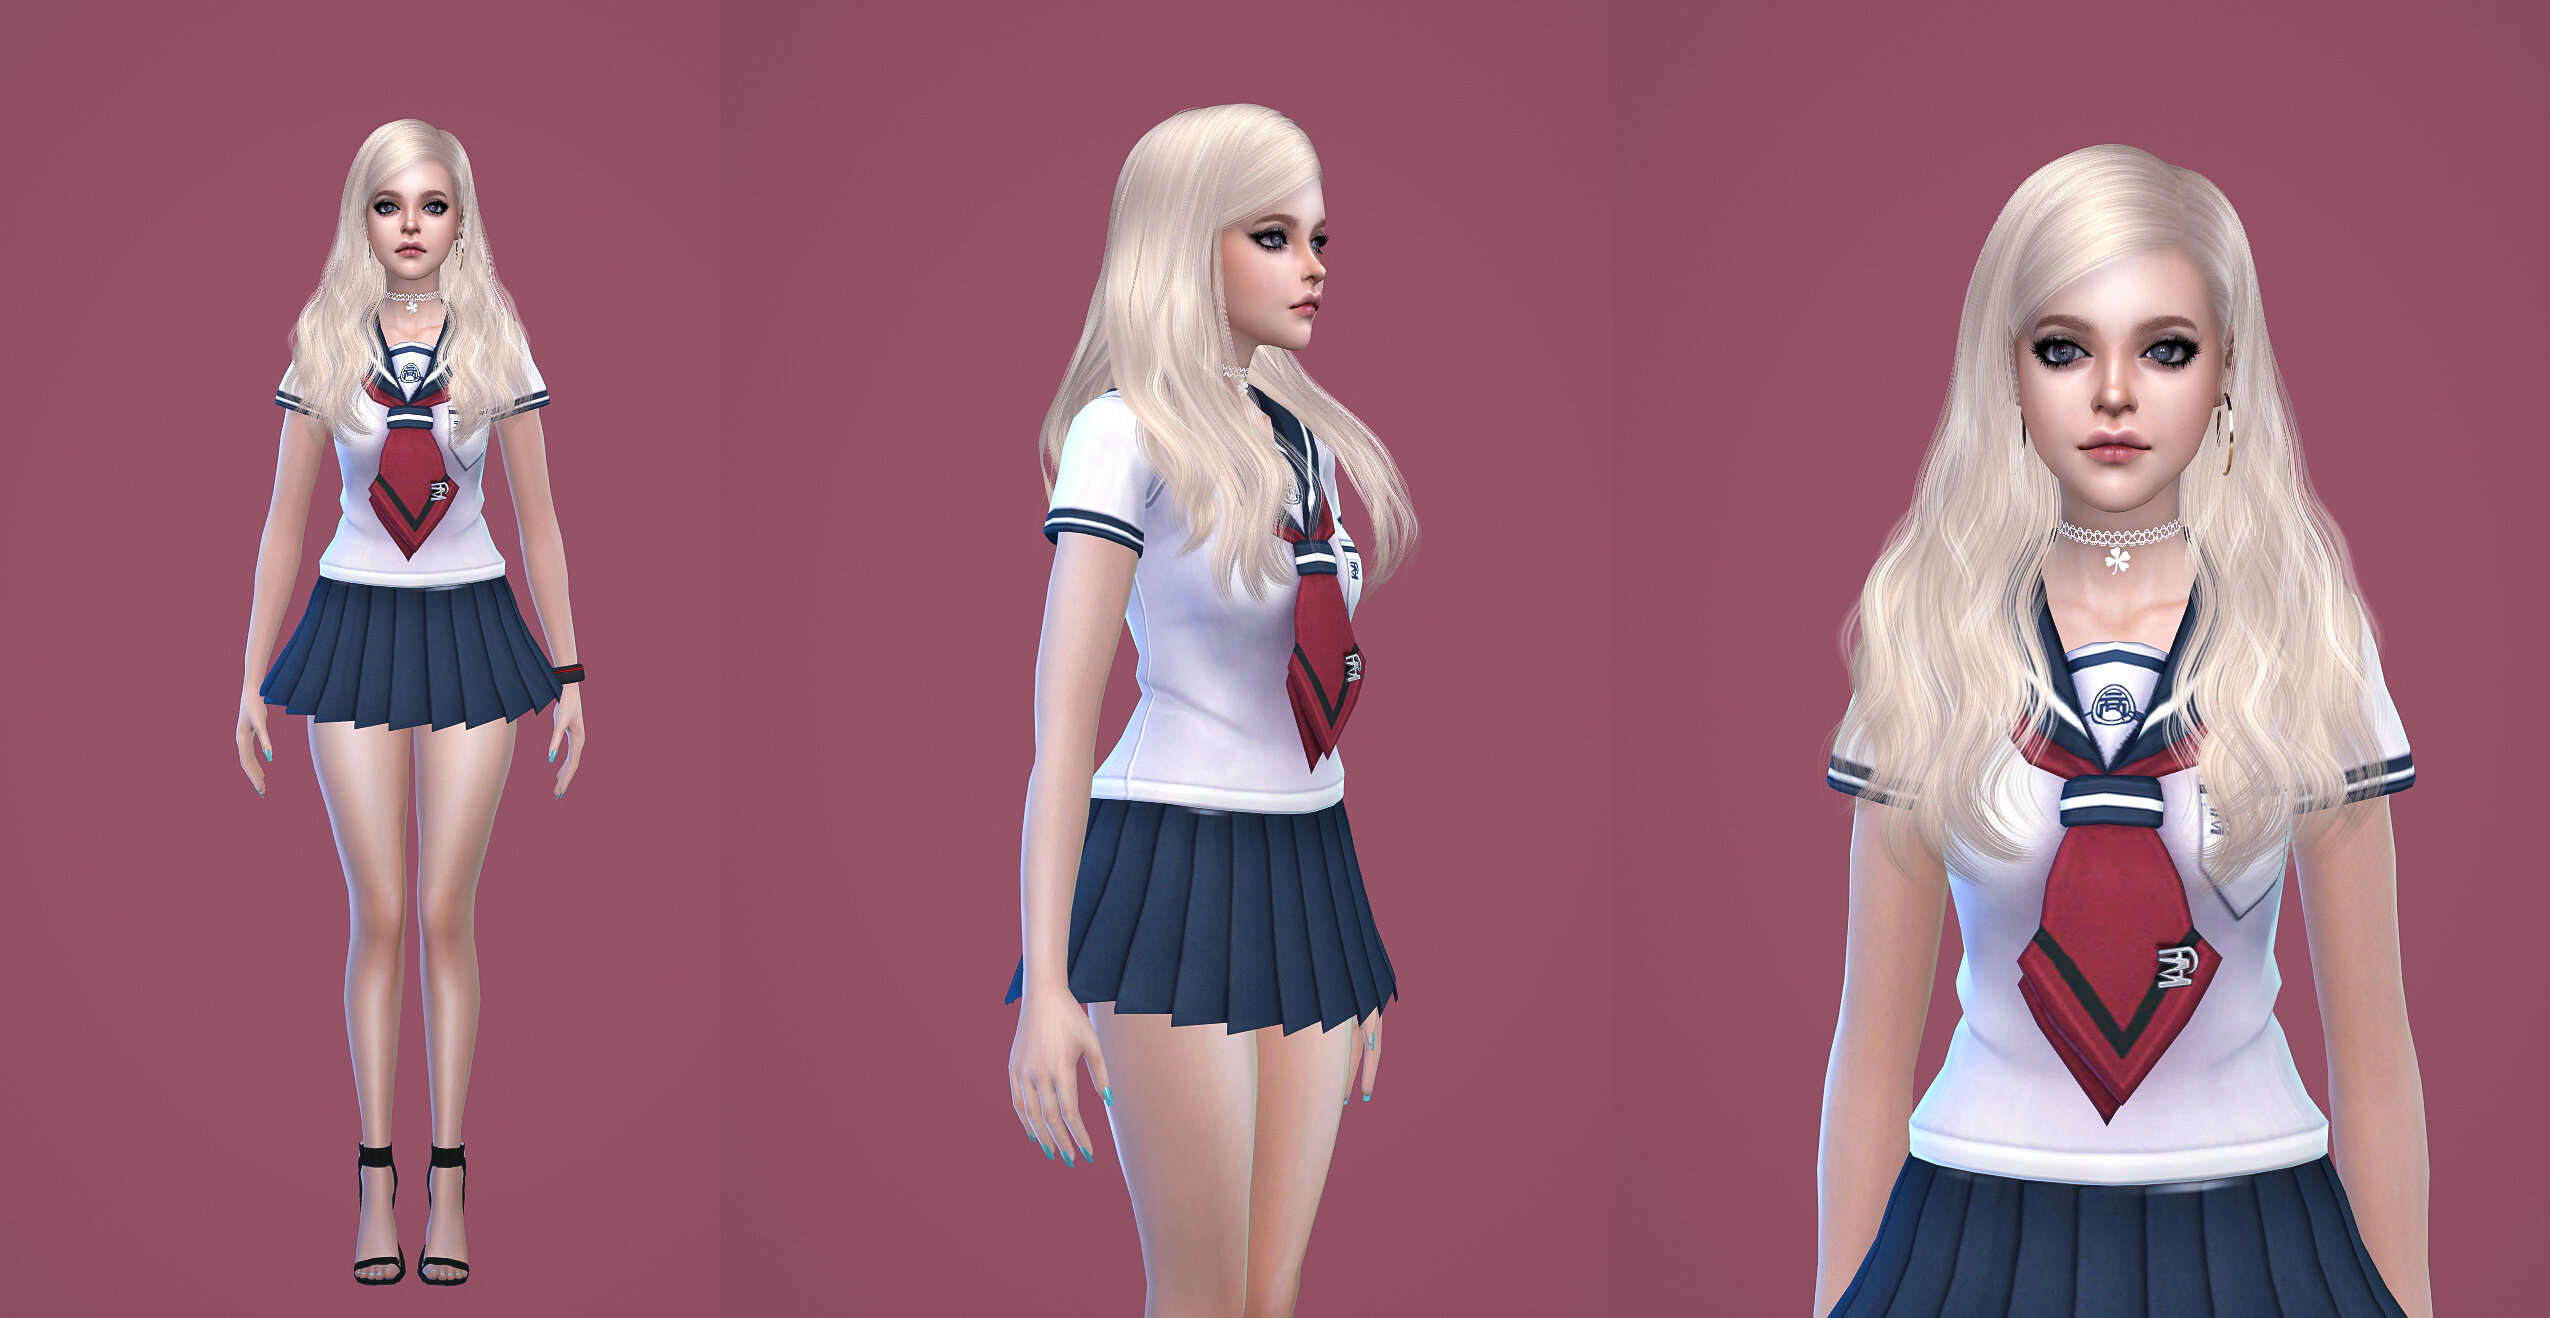 Share Your Female Sims! - Page 130 - The Sims 4 General Discussion ...